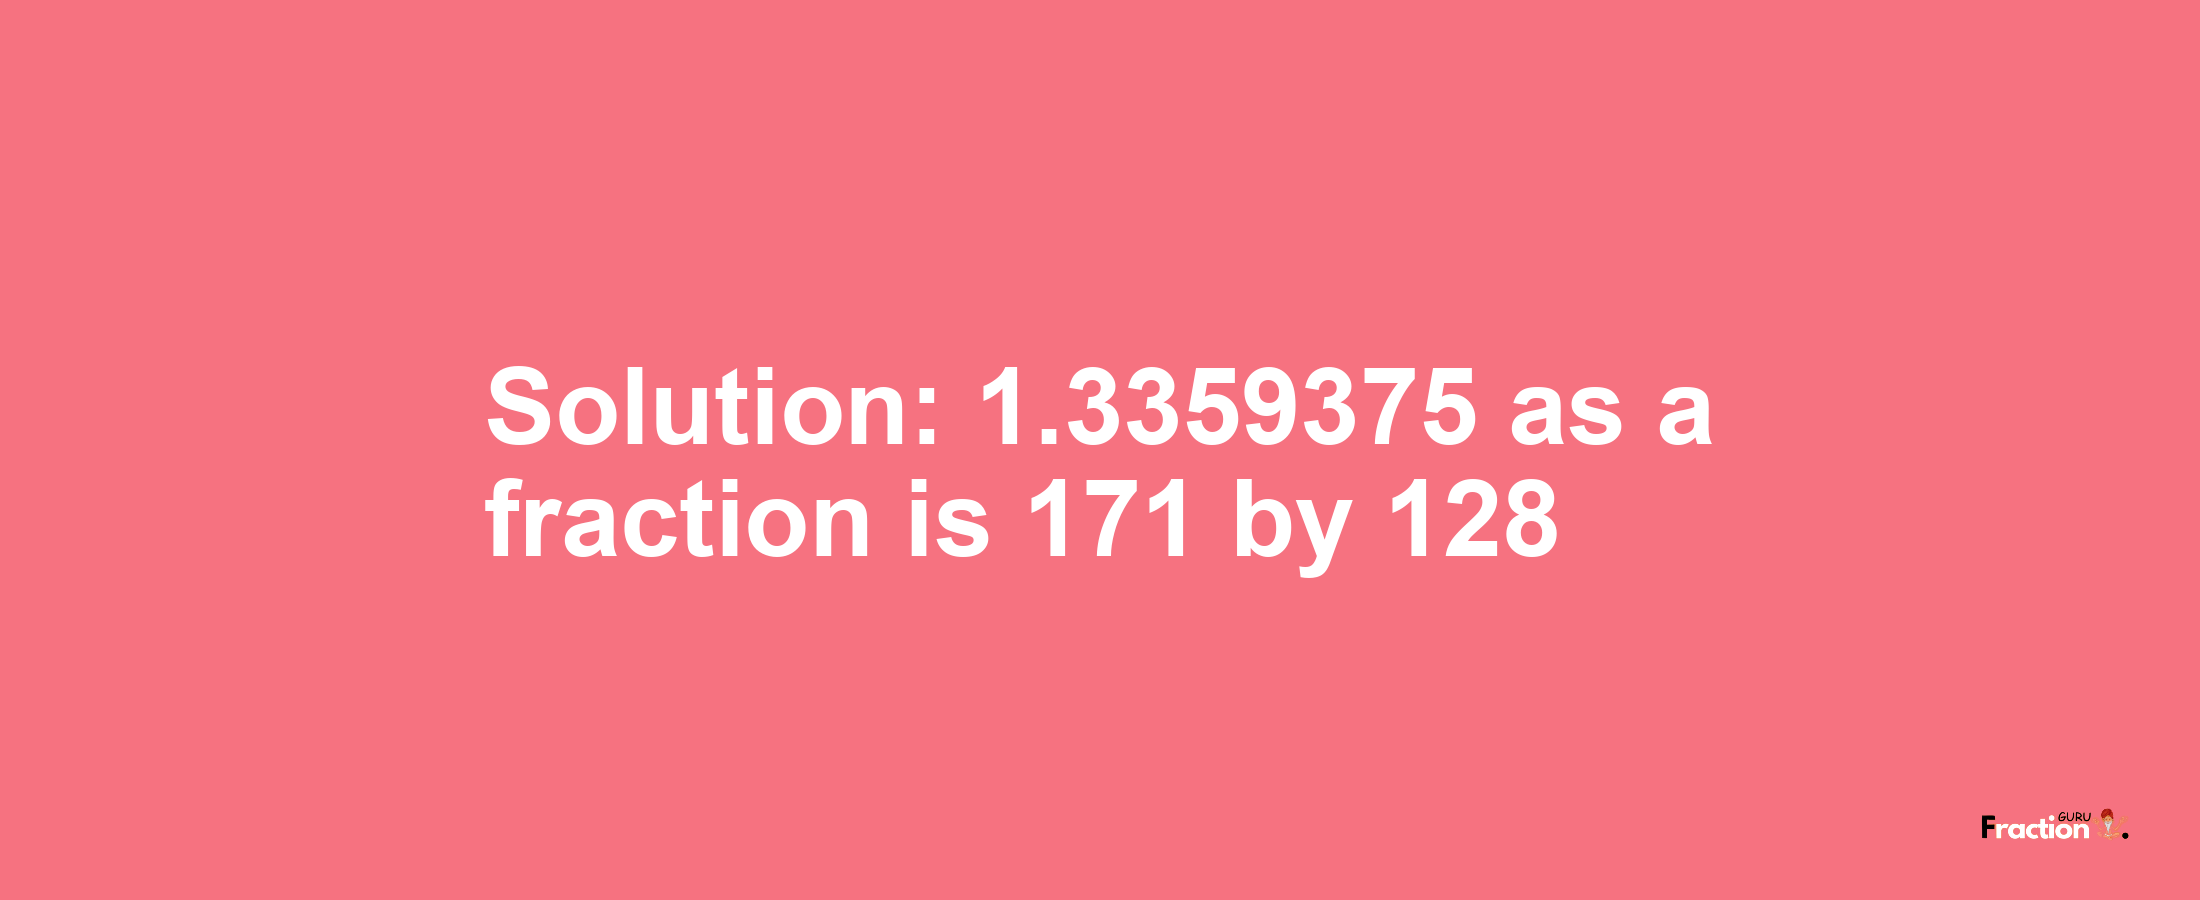 Solution:1.3359375 as a fraction is 171/128